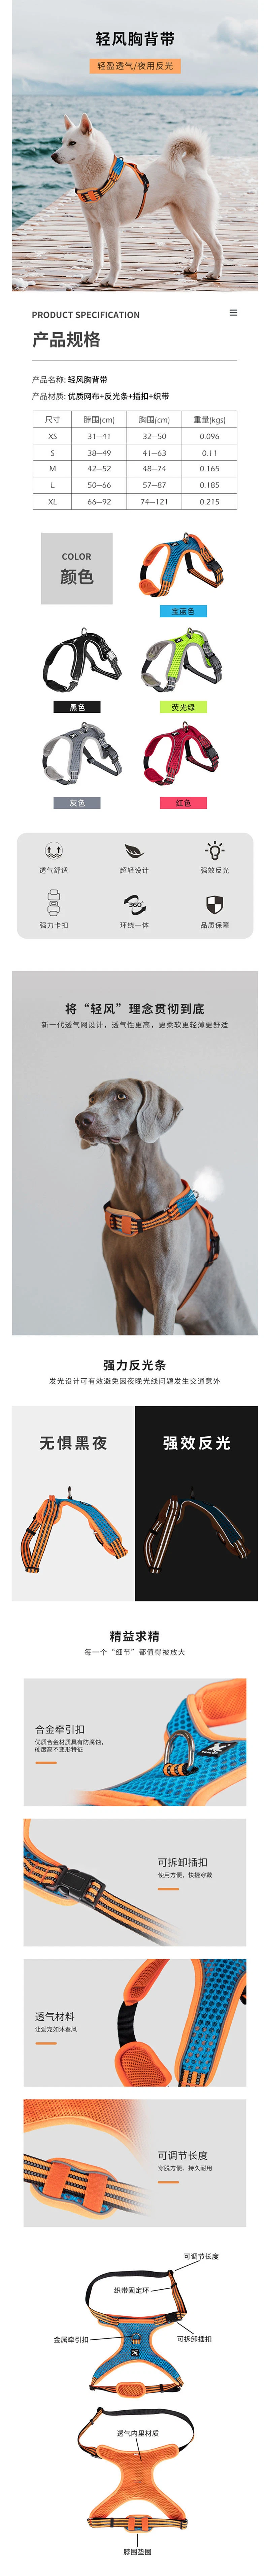 Wholesale Escape Proof Small Pet Dog Cat Mesh Harness Personalized Designer Dog Vest No Pull Leash and Harness Set for Dog